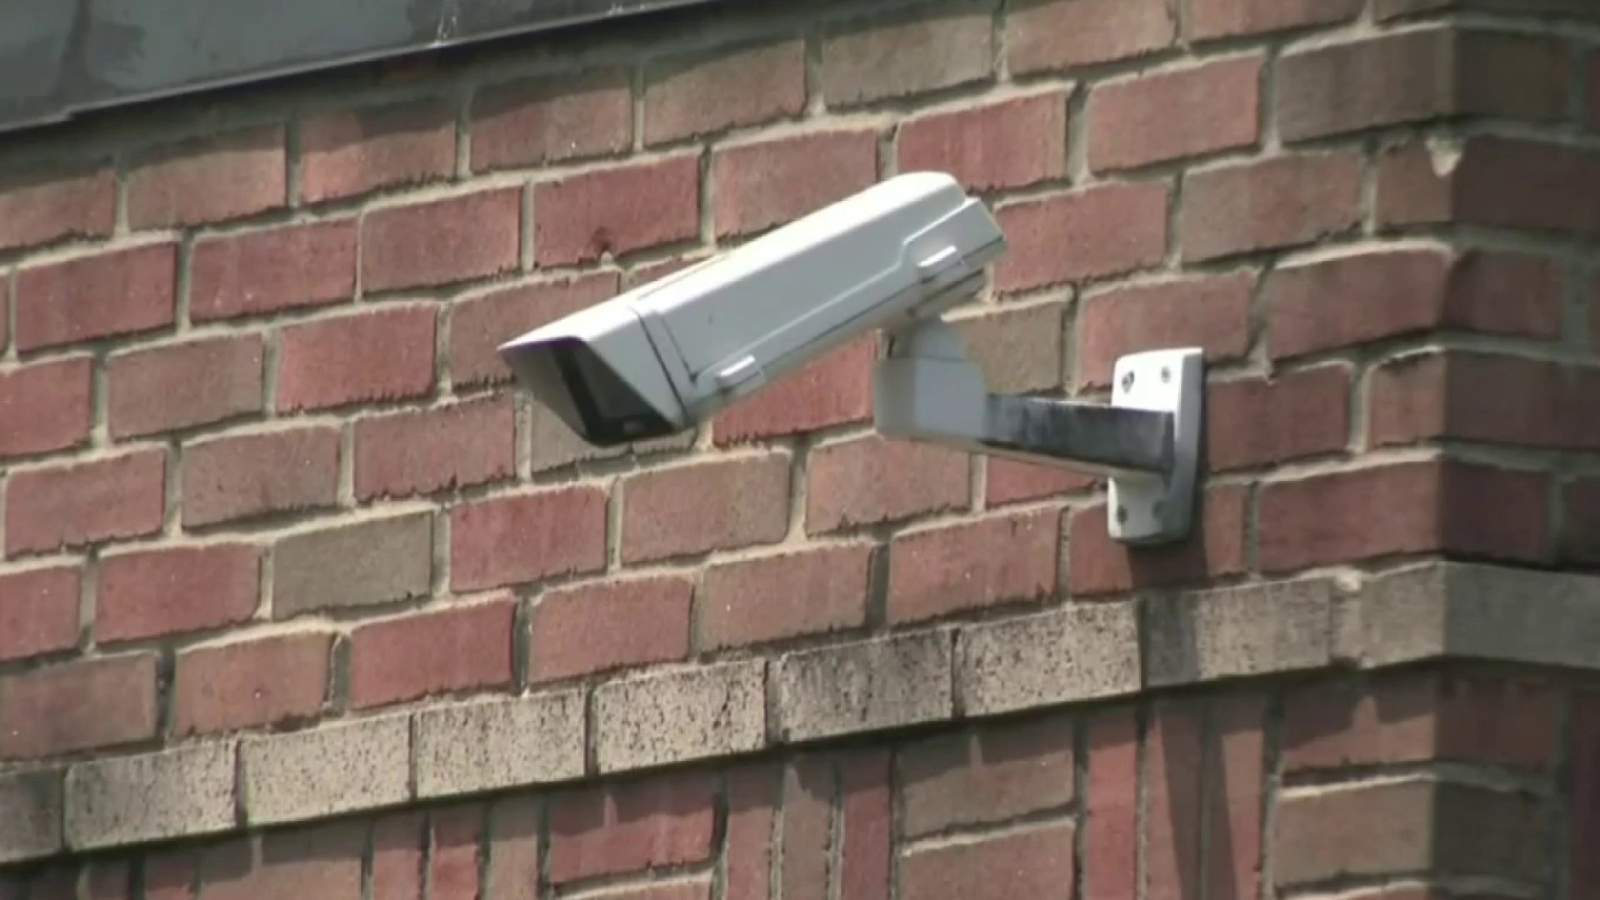 Detroit police challenged over face recognition flaws, bias